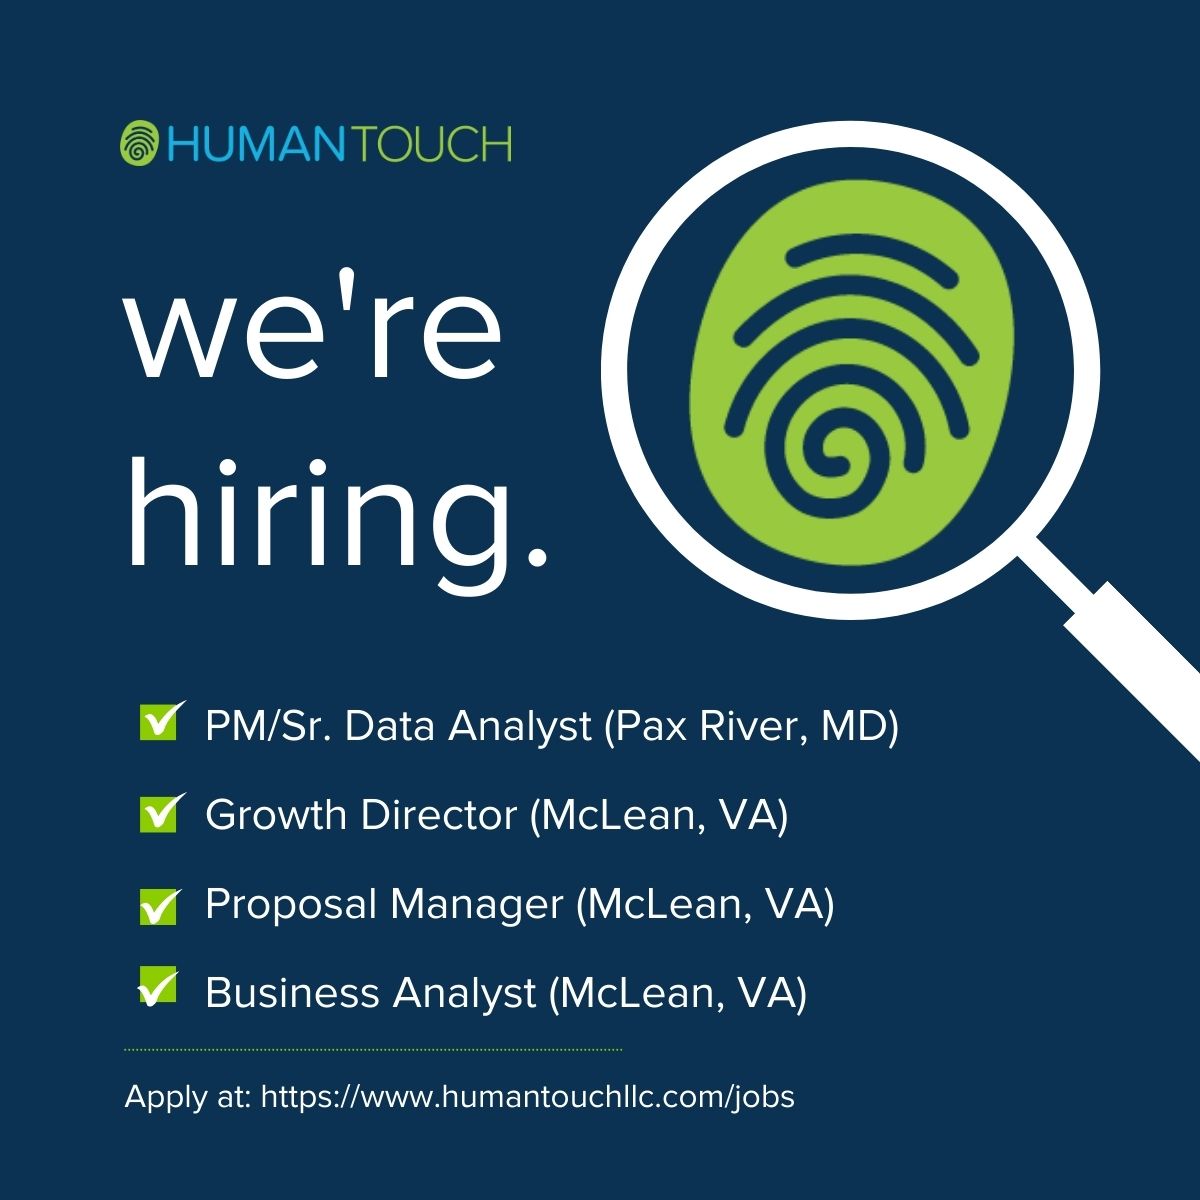 Ready to grow your career and leave a lasting imprint? Join our team and partner with federal customers to drive digital transformation and change management. Apply today! humantouchllc.com/careers
#Hiring #ITJobs #DataAnalyst #PM #Growth #ProposalManager #BusinessAnalyst #USN #VA